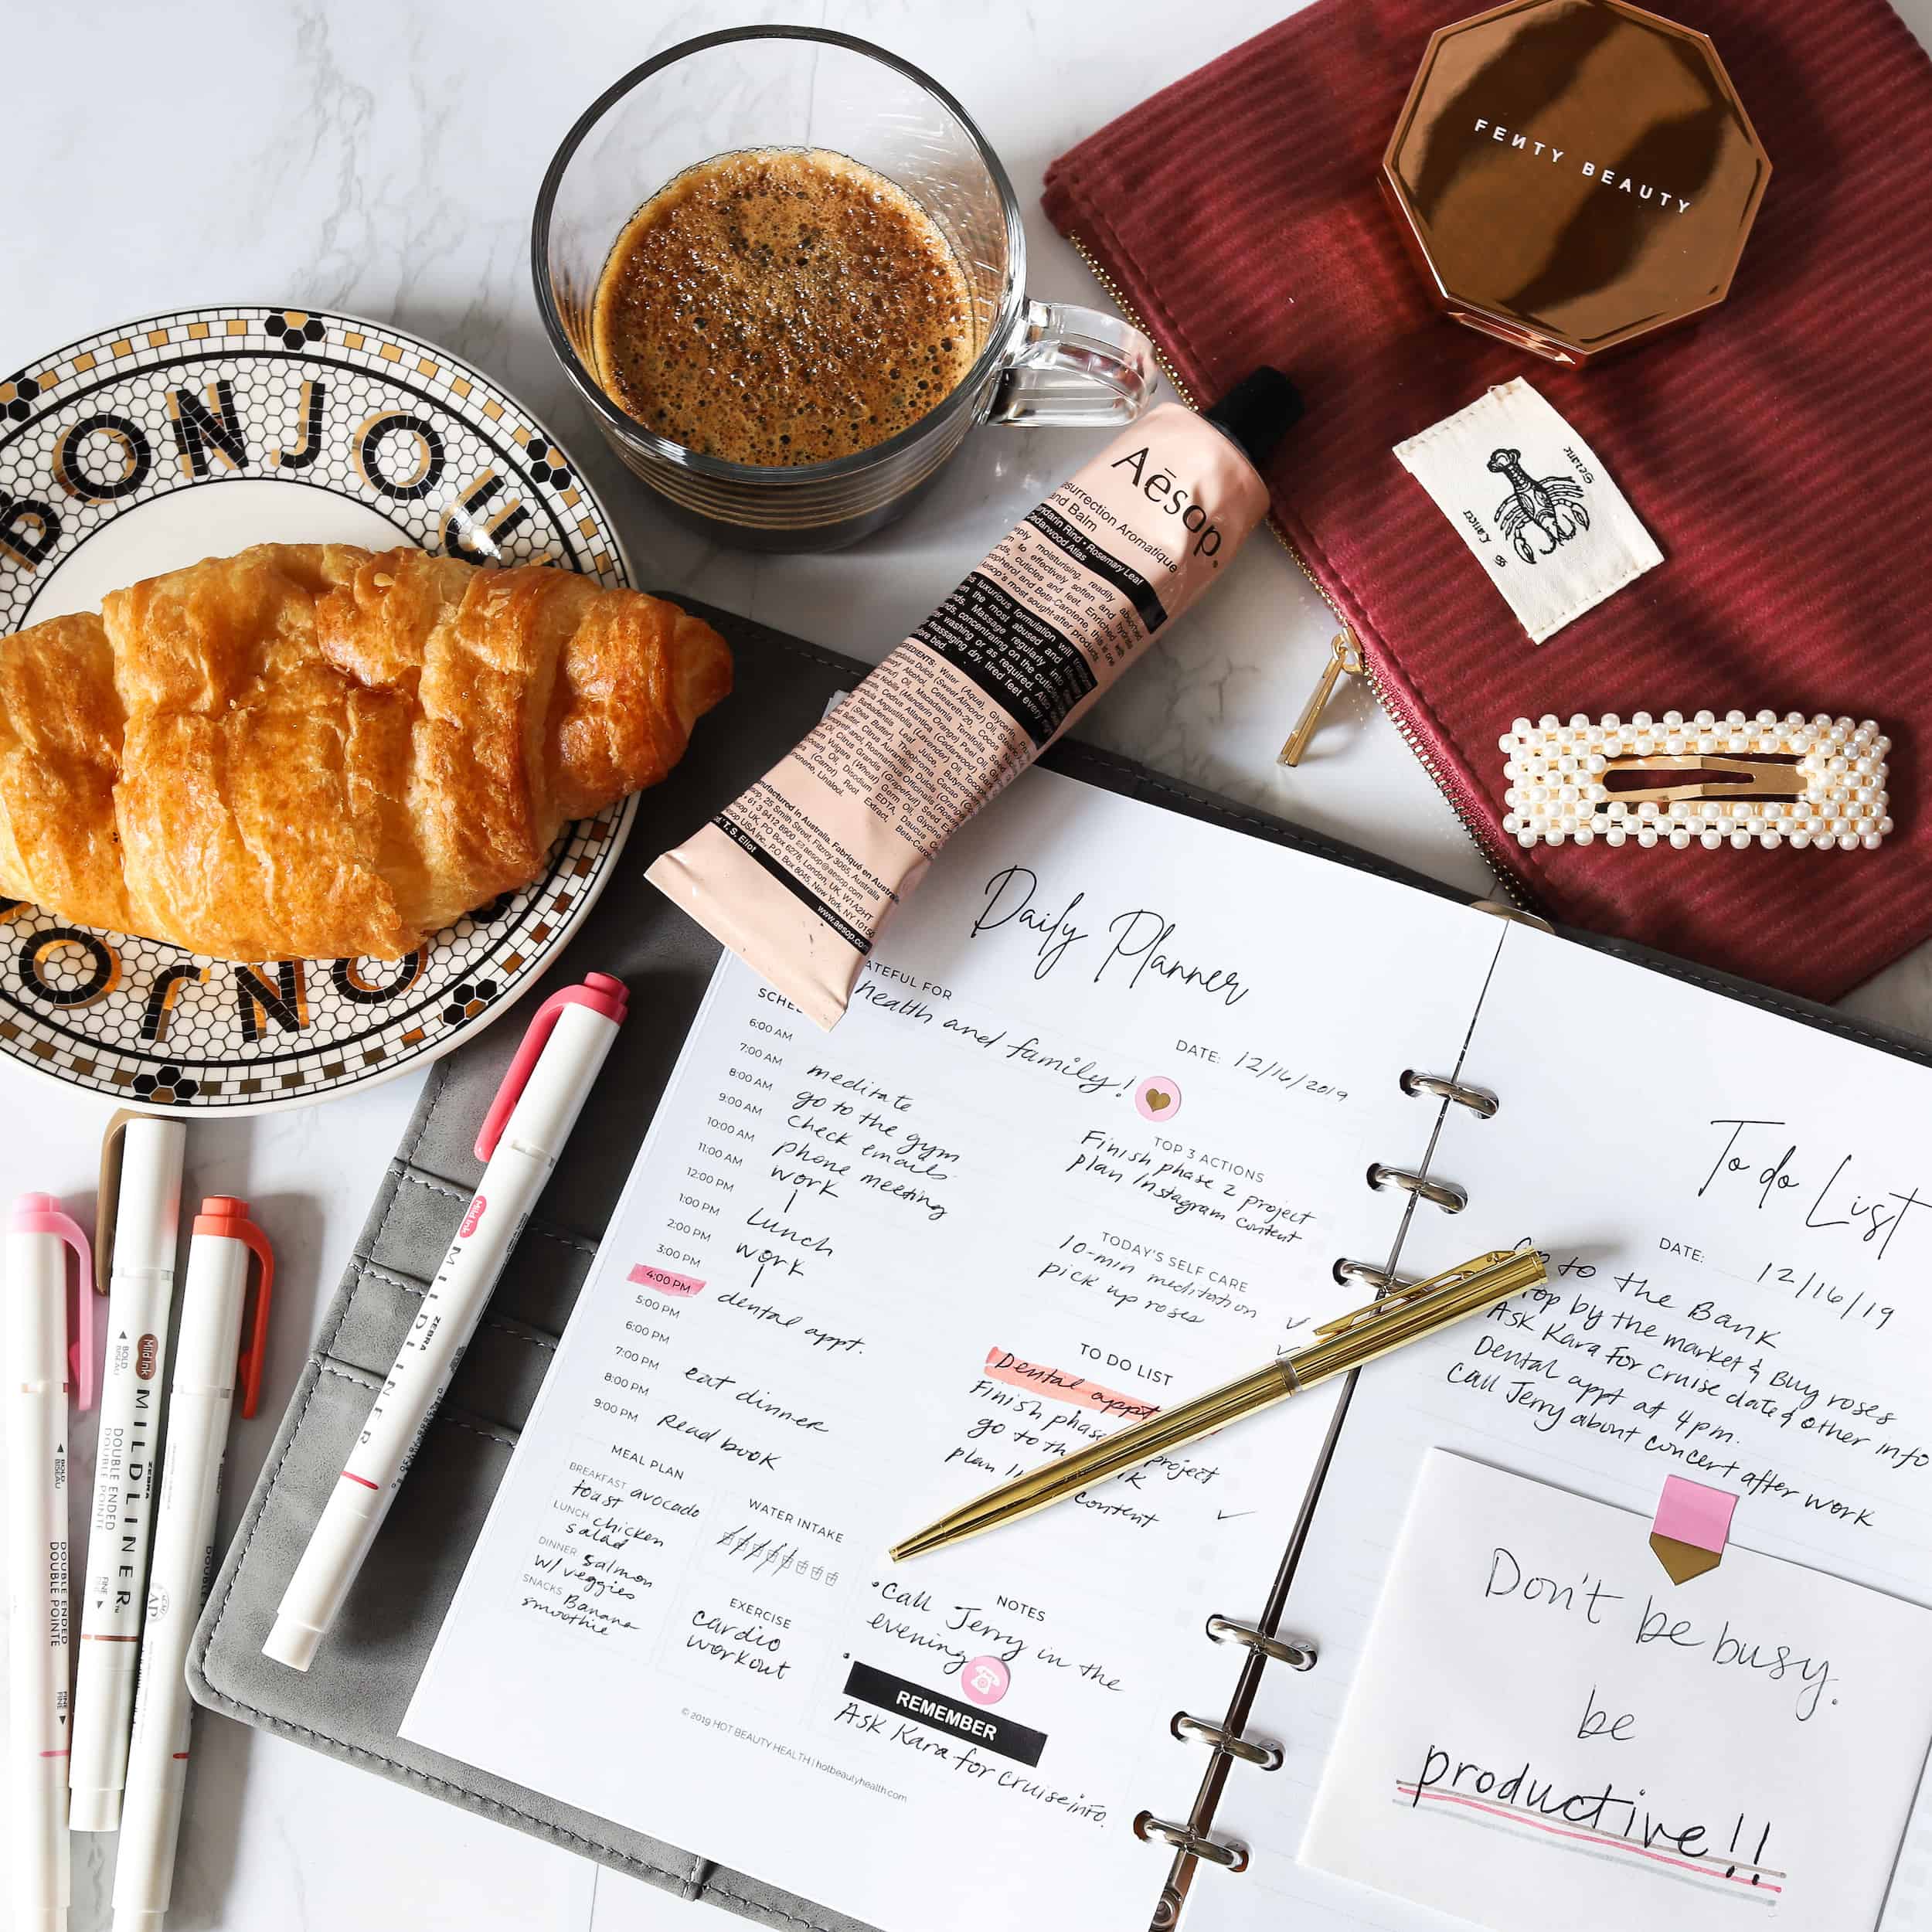 How To Build A Daily Routine With A Physical Planner